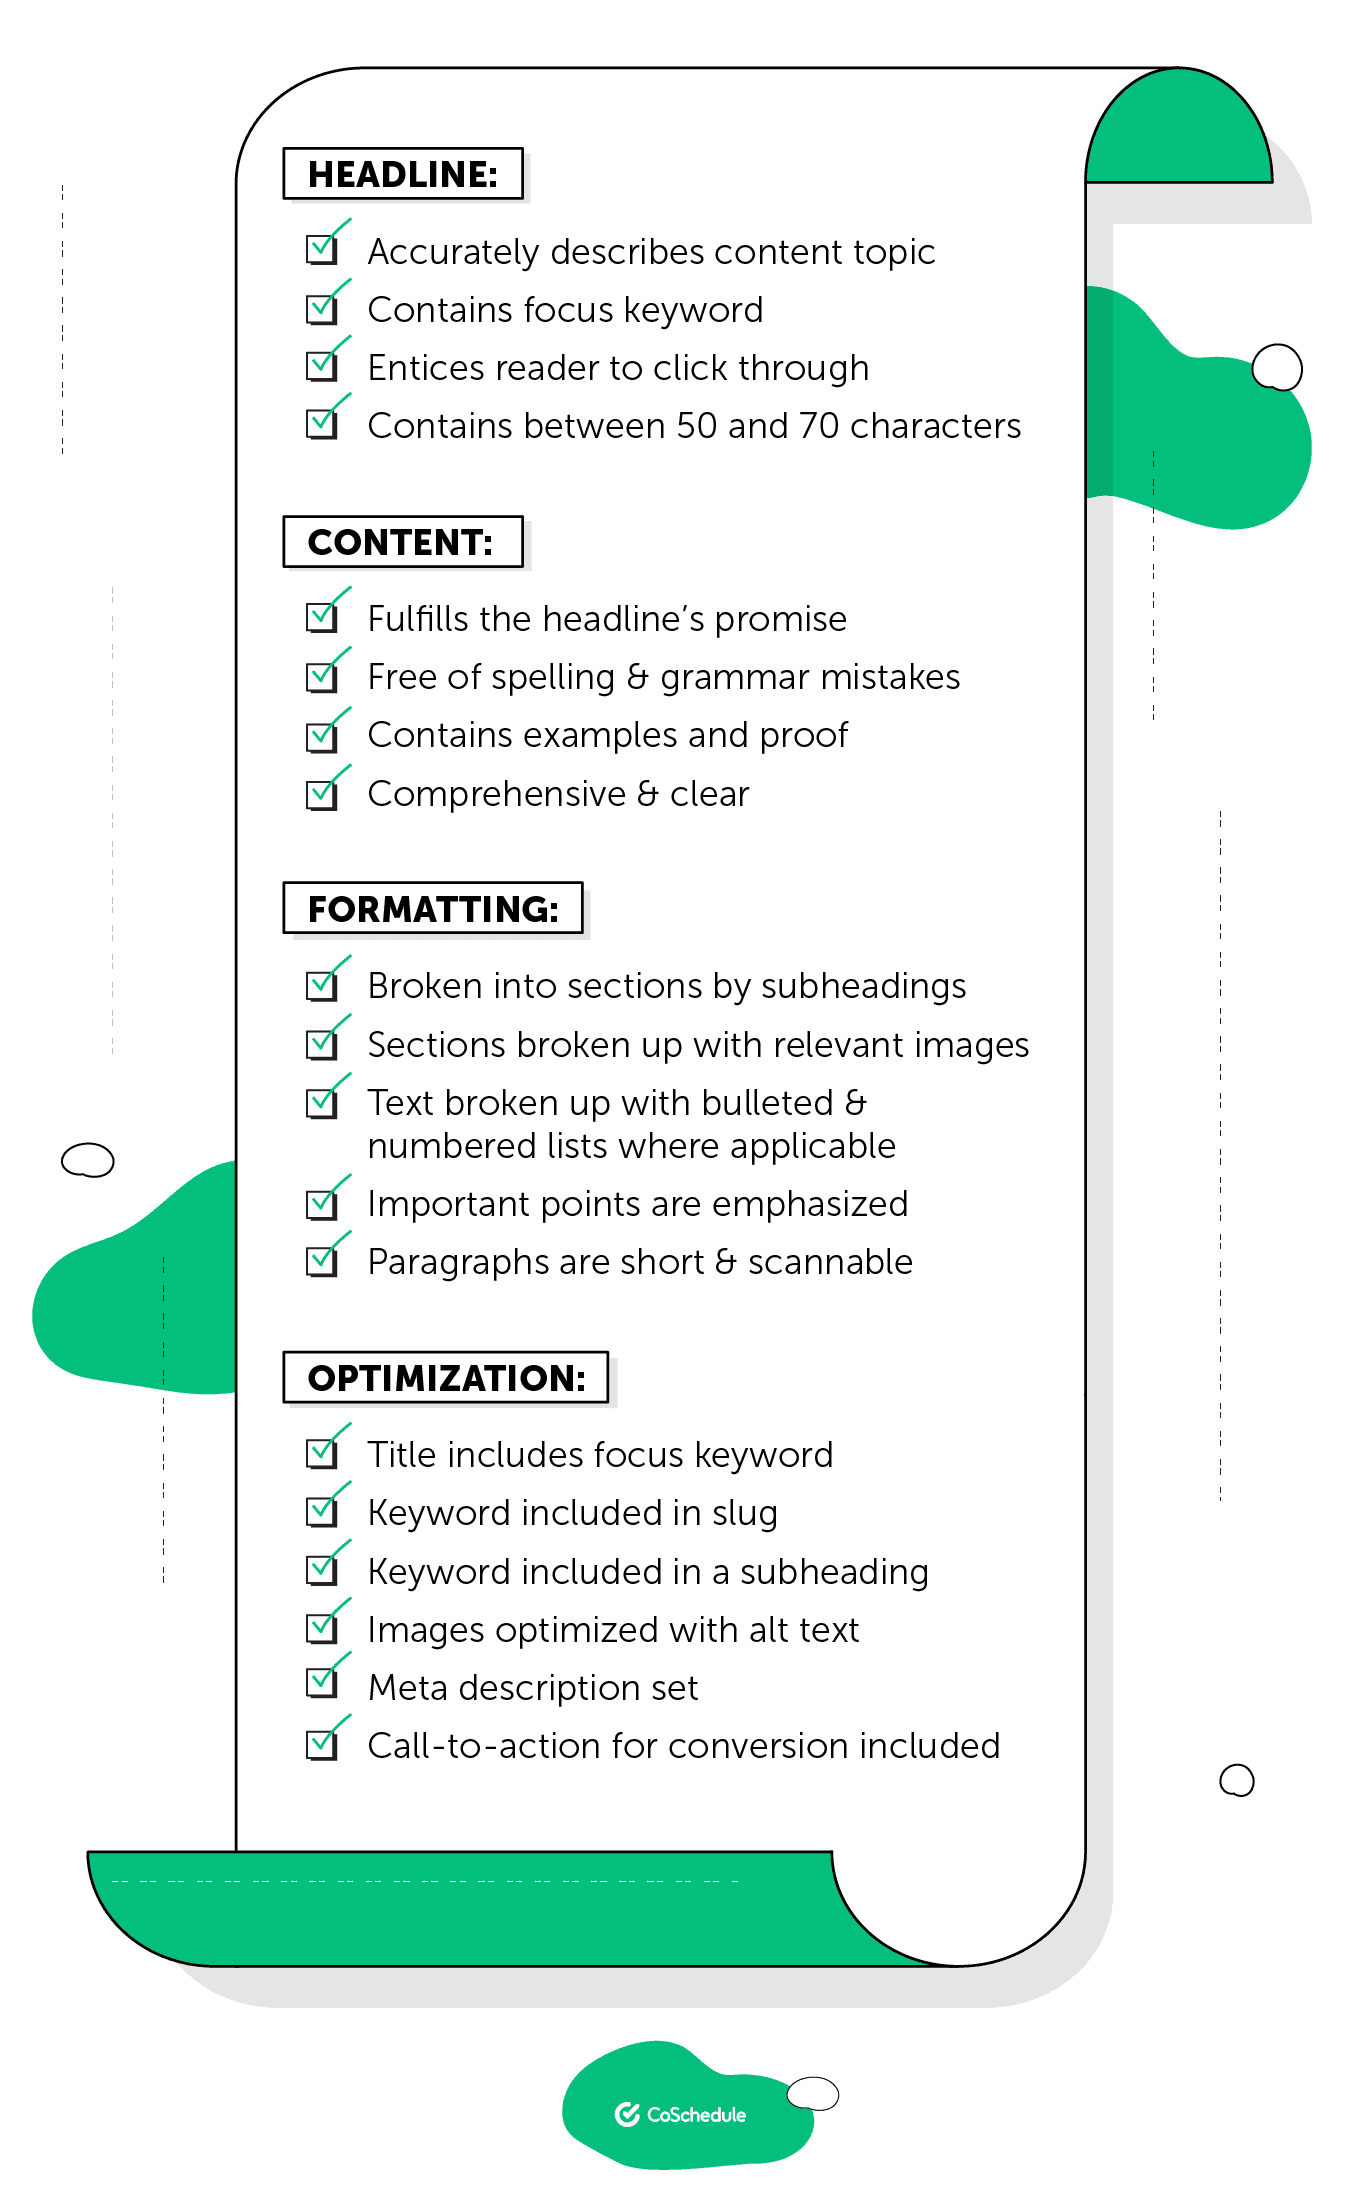 Example of a content approval checklist